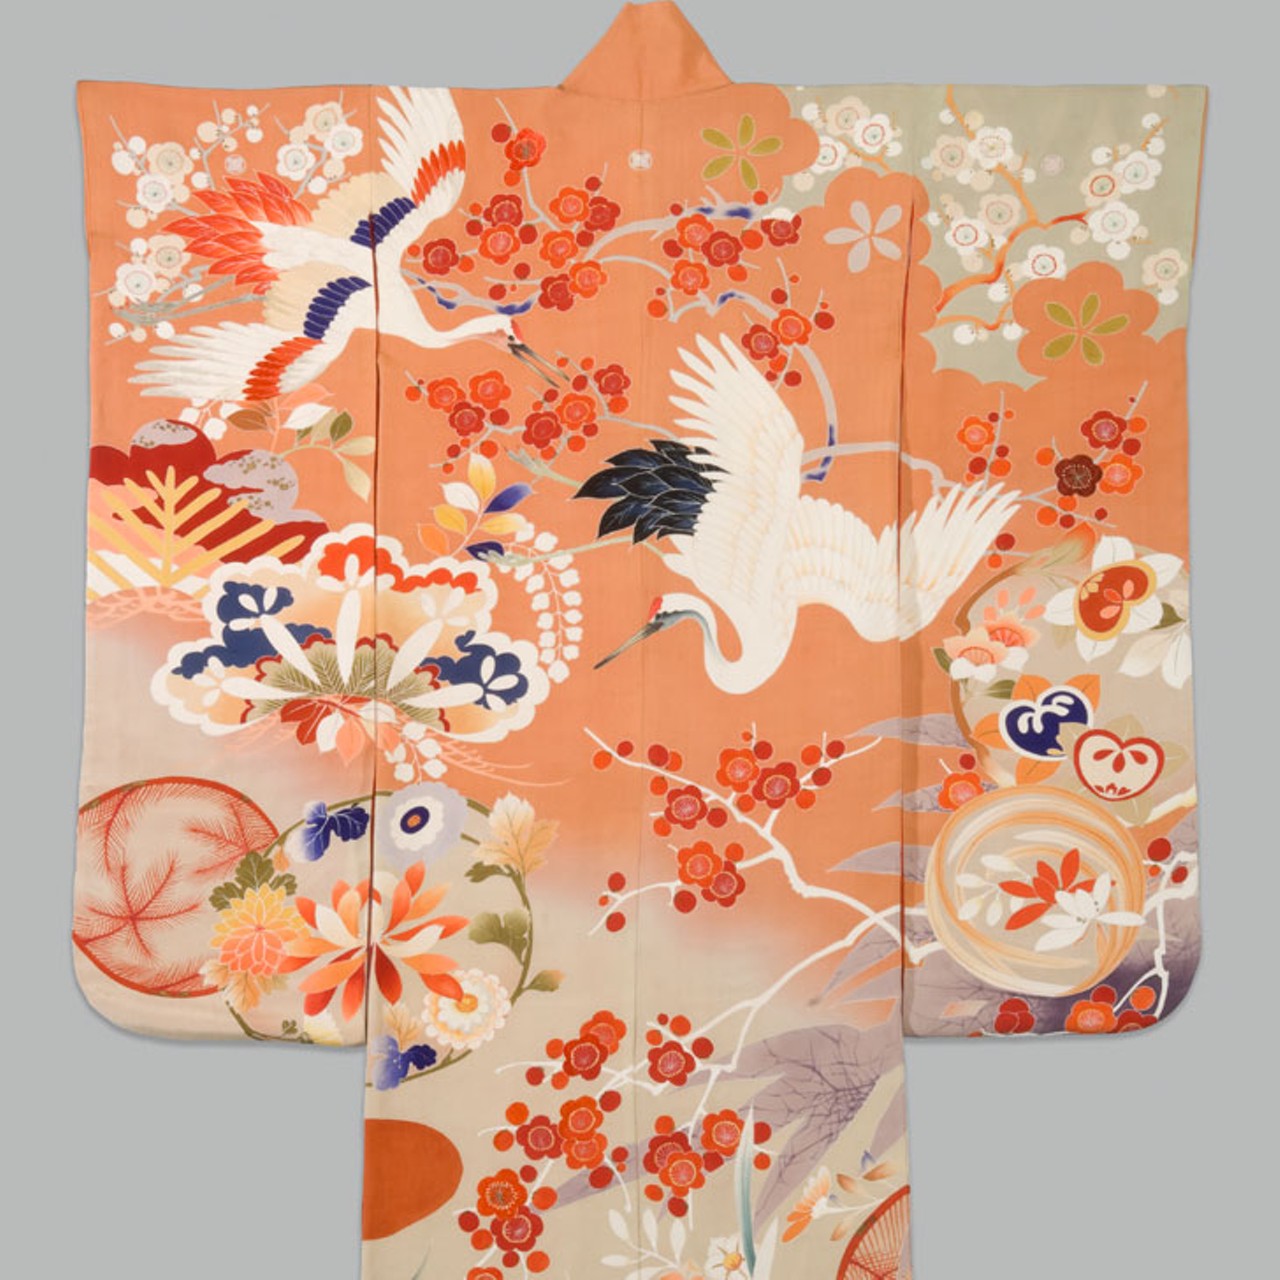 Silk kimono, early 20th century 
Cincinnati Art Museum; A gift from Eleanor Lee Hart's collection of Japanese art
Photo by Scott Hisey